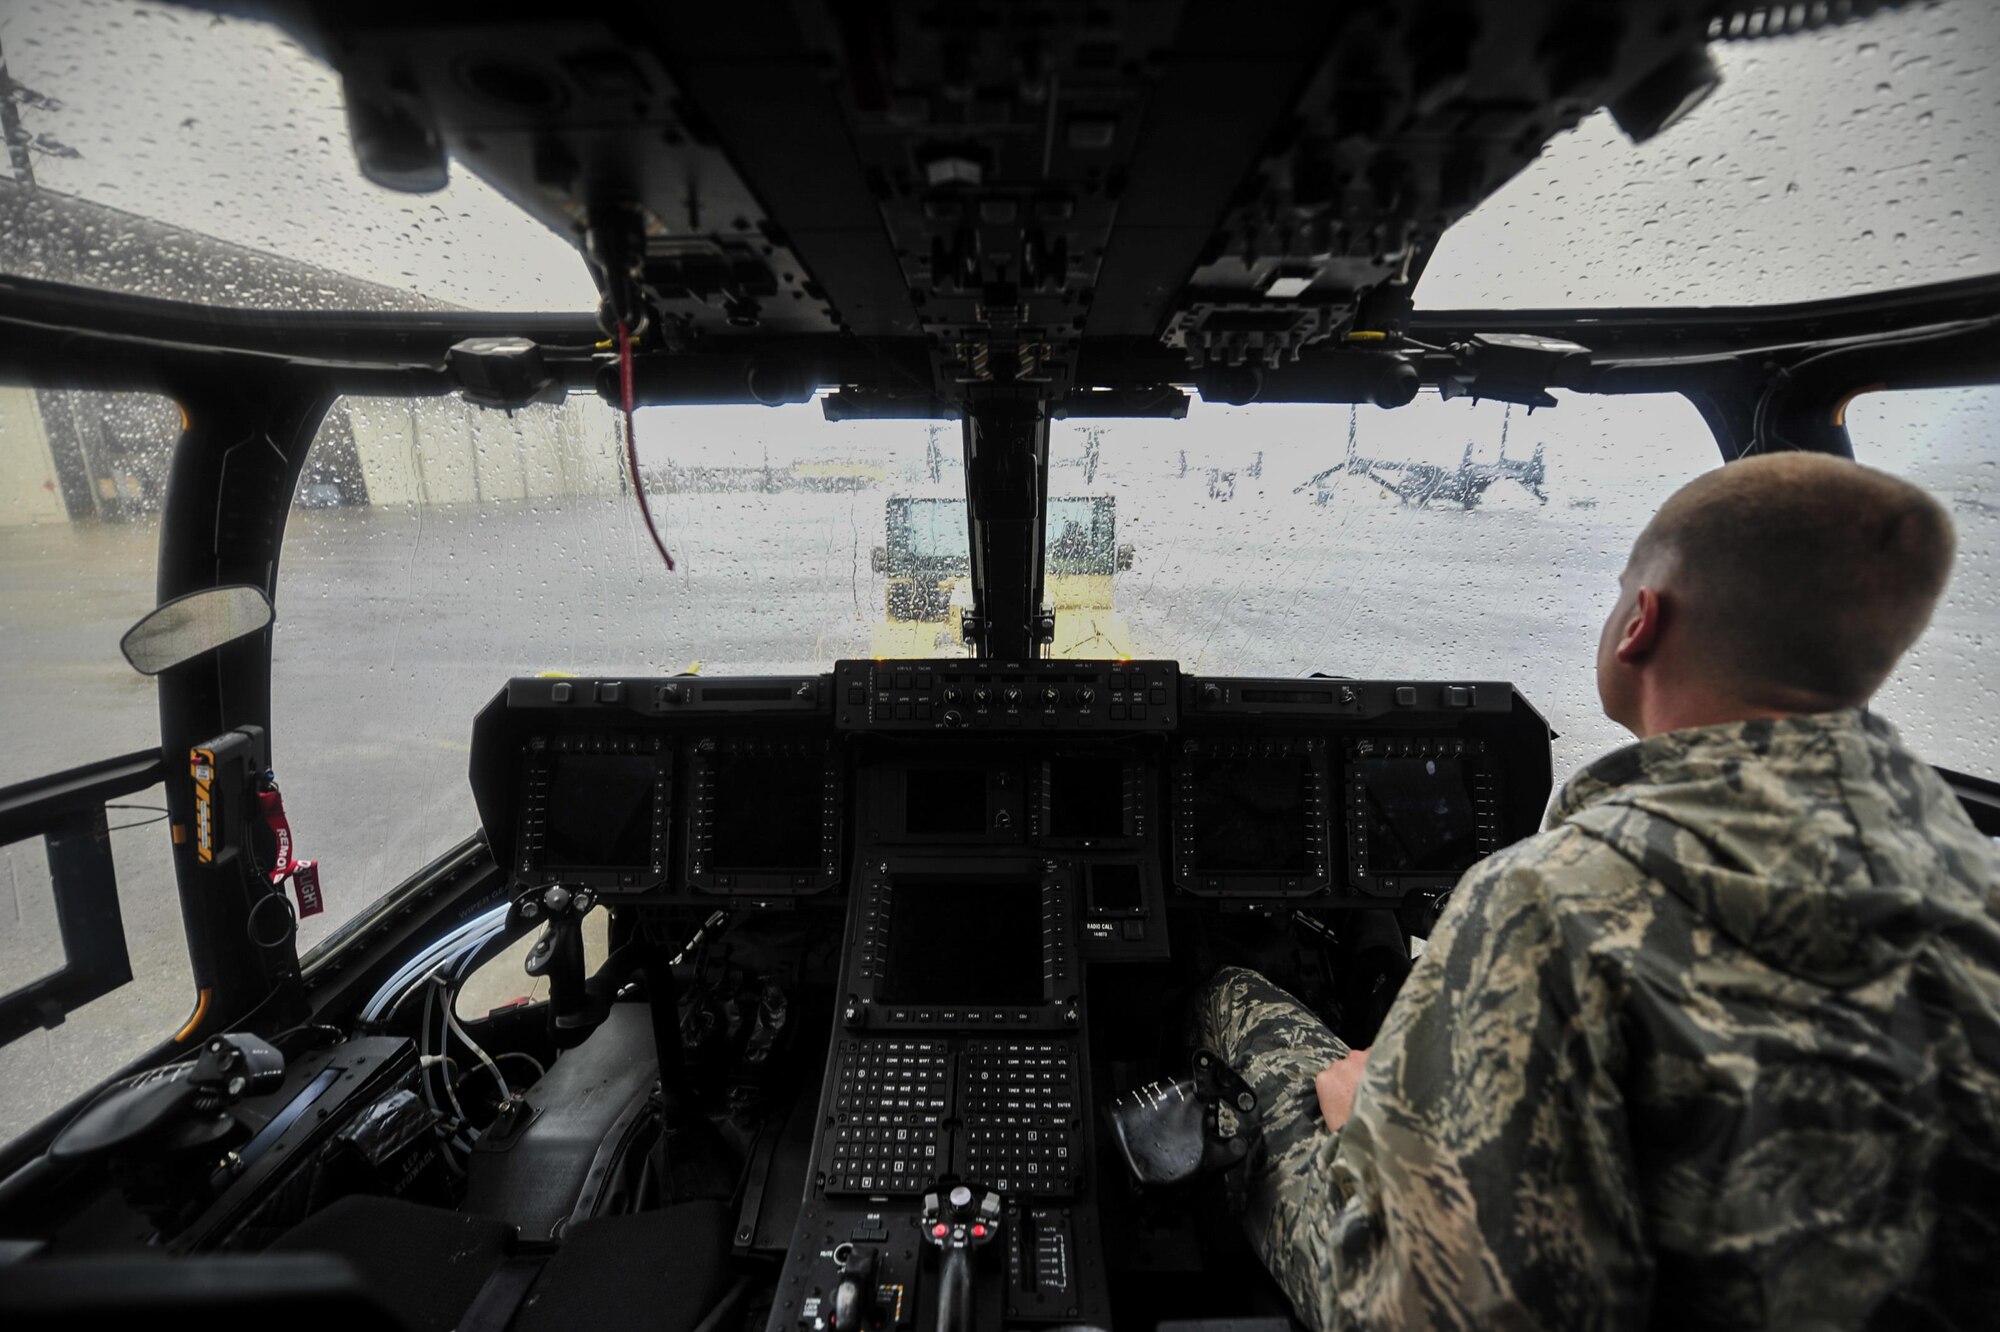 Staff Sgt. Jonathan Knutson, a crew chief with the 801st Special Operations Aircraft Maintenance Squadron, operates the brakes of a CV-22B Osprey tiltrotor aircraft while it’s towed into Freedom Hangar at Hurlburt Field, Fla., Aug. 11, 2016. The 801st SOAMXS crew chiefs continued normal operations despite the inclement weather. (U.S. Air Force photo by Airman 1st Class Joseph Pick)